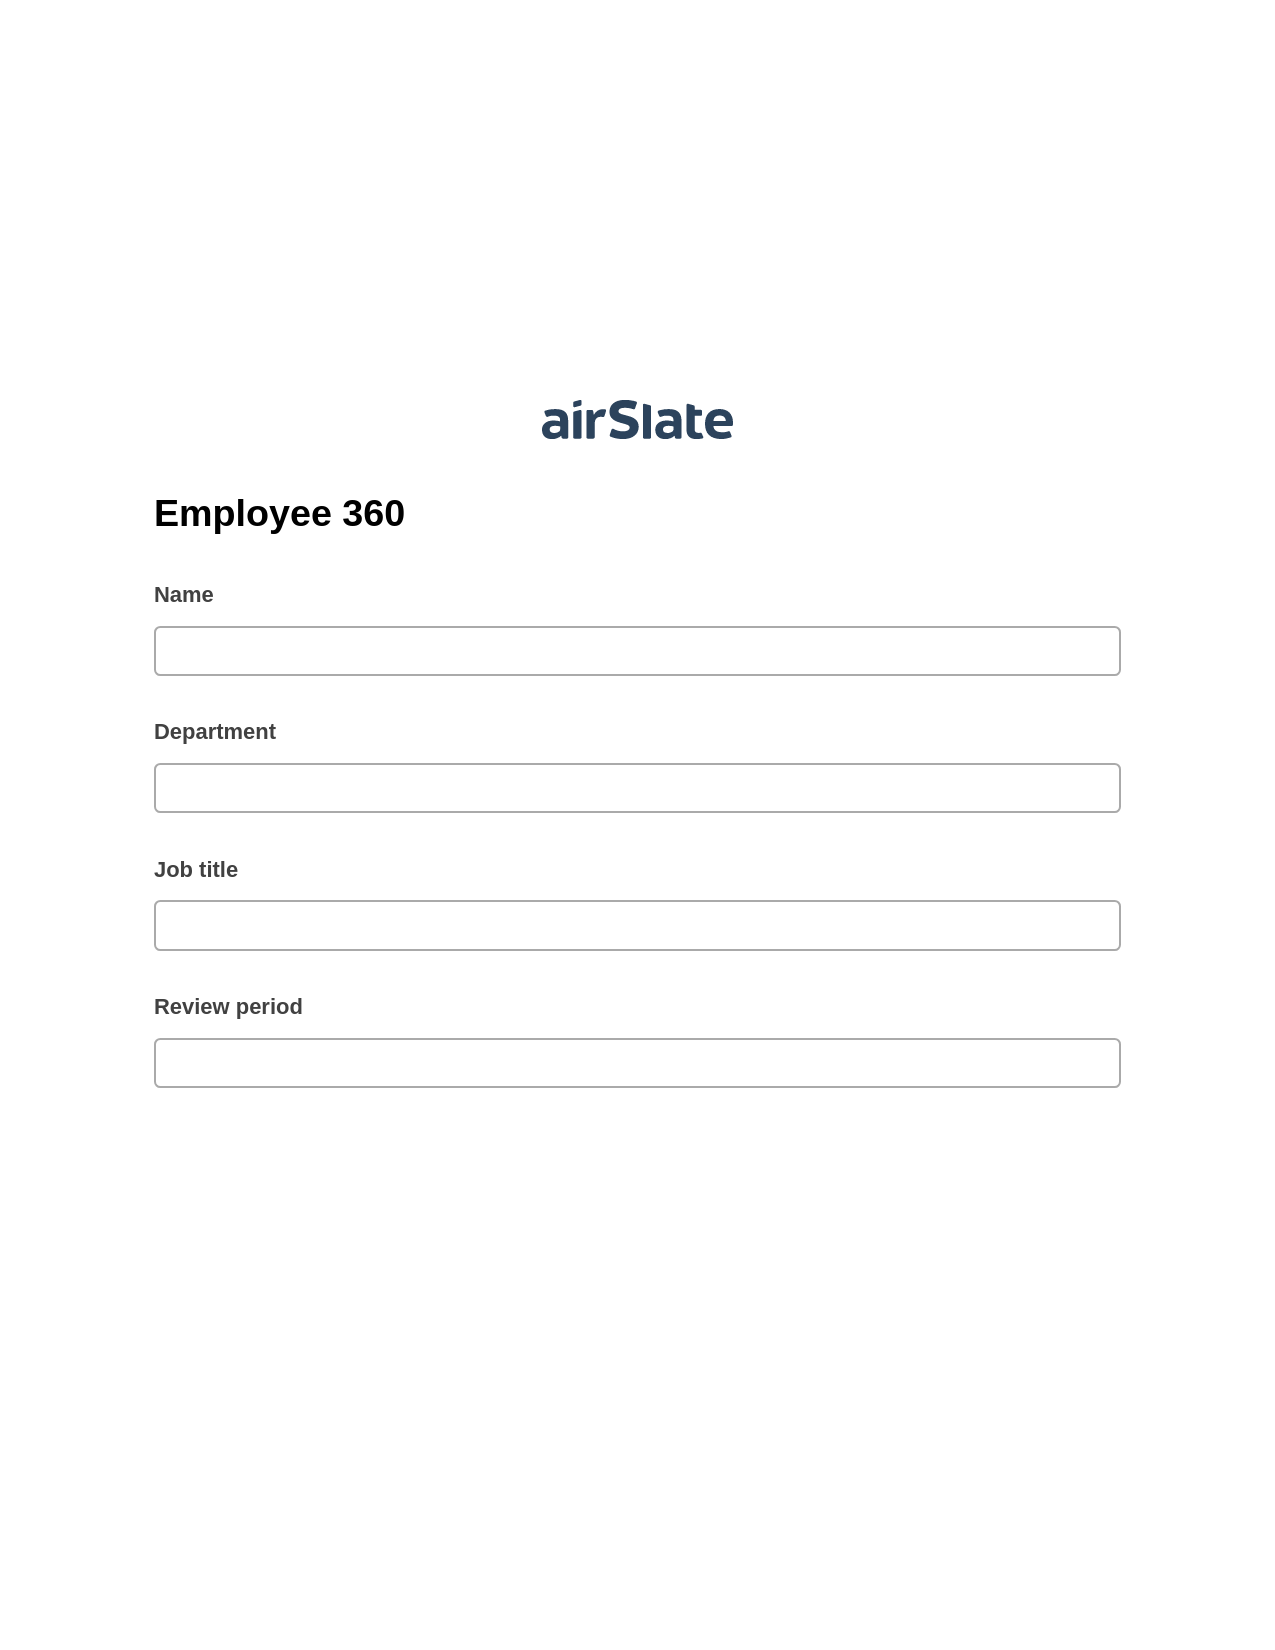 Multirole Employee 360 Pre-fill Dropdowns from Airtable, Invoke Salesforce Process Bot, Archive to Dropbox Bot